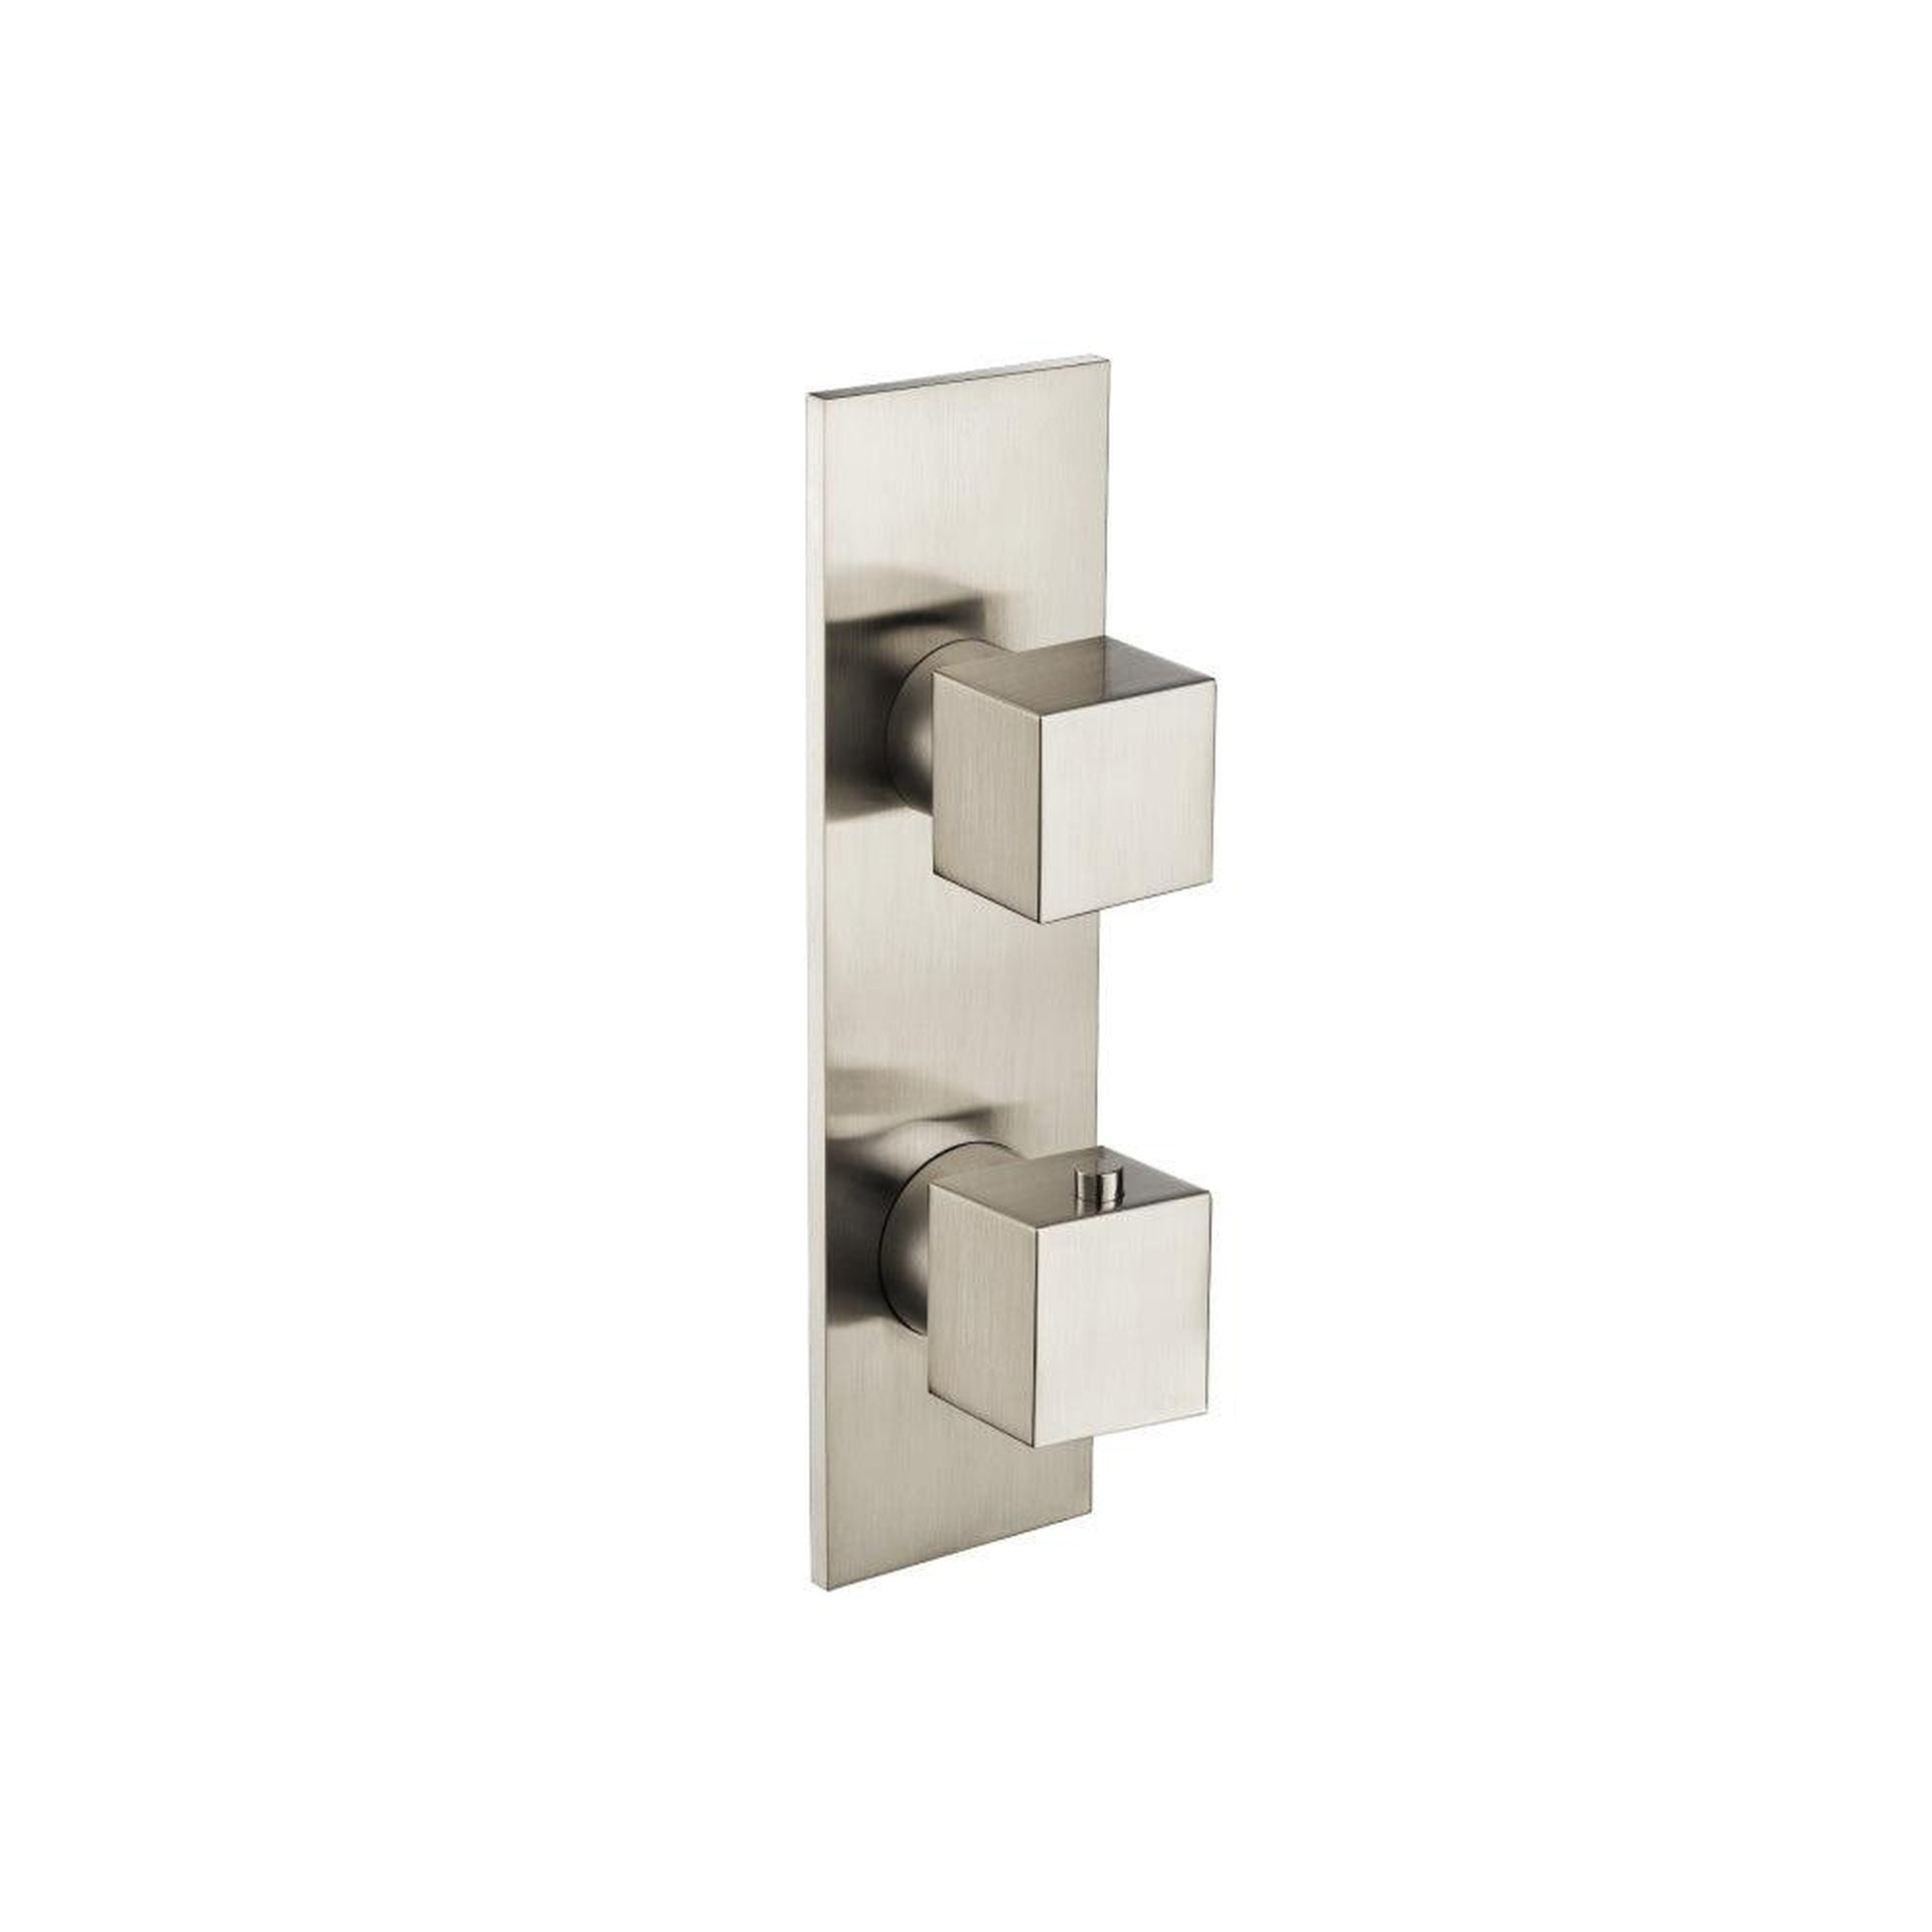 Isenberg Serie 160 3/4" Single Output Horizontal Thermostatic Shower Valve and Trim in Brushed Nickel (160.2720BN)